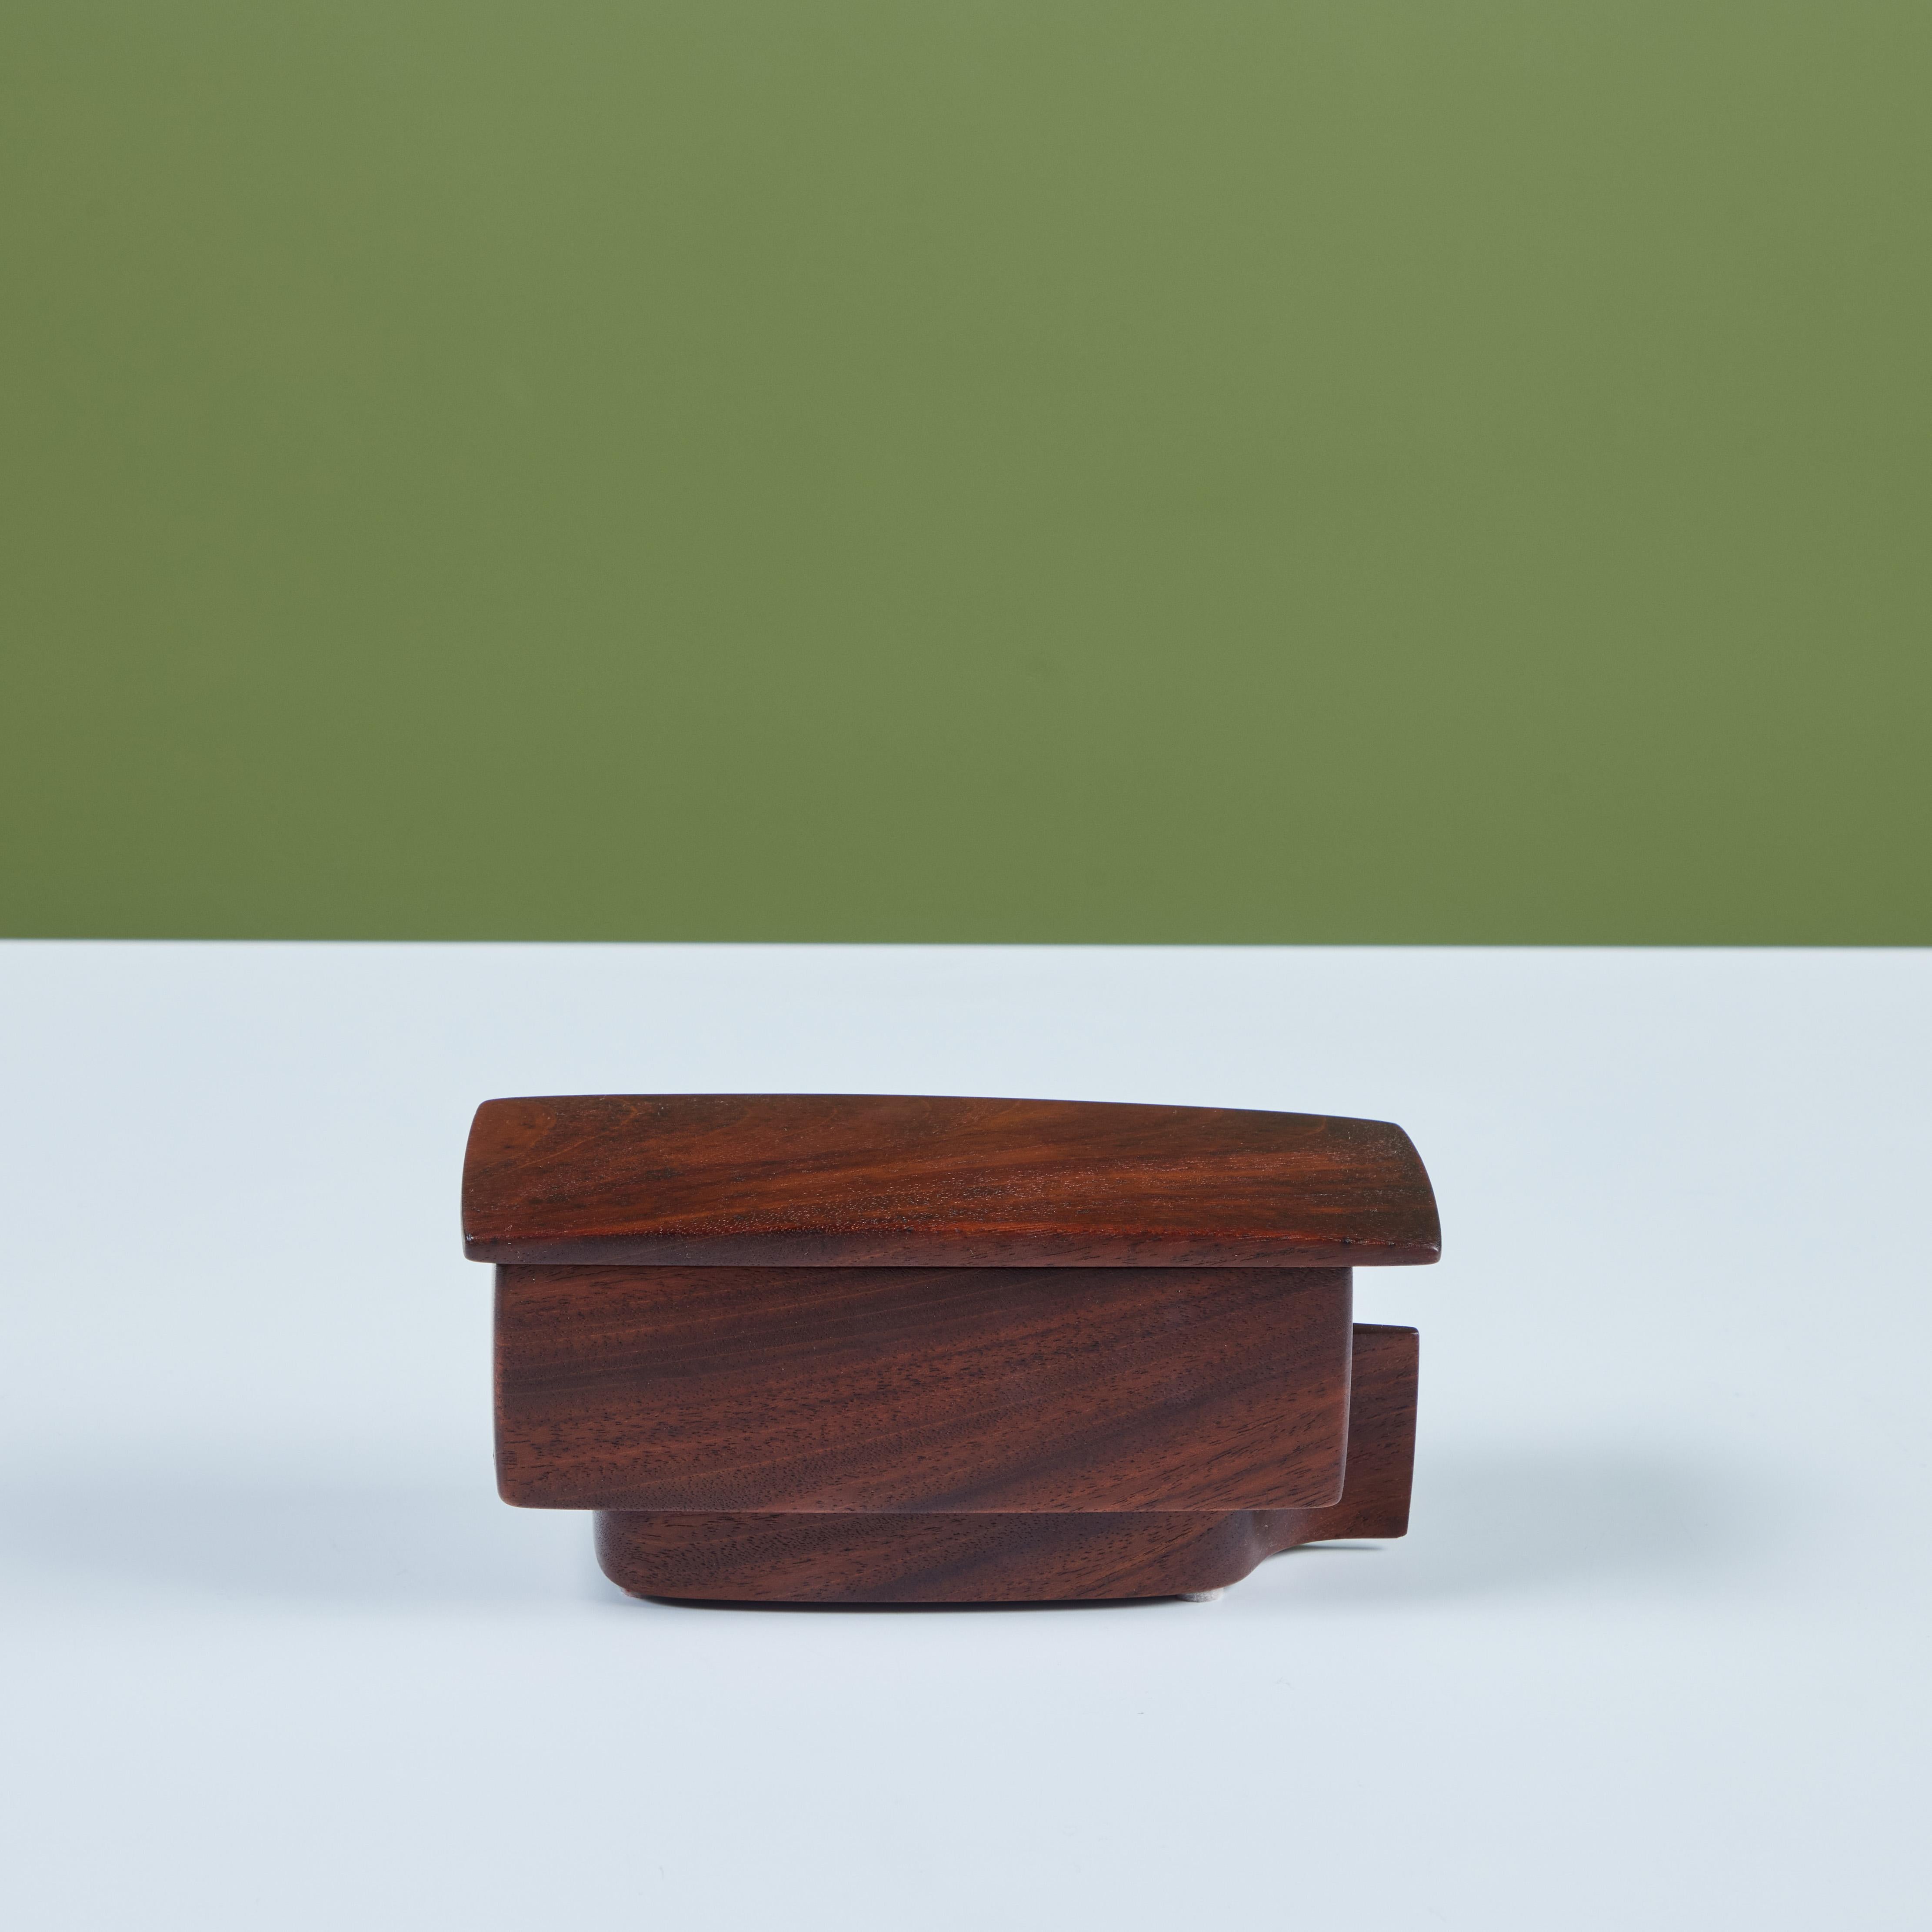 Rectangular Lidded Walnut Box In Excellent Condition For Sale In Los Angeles, CA